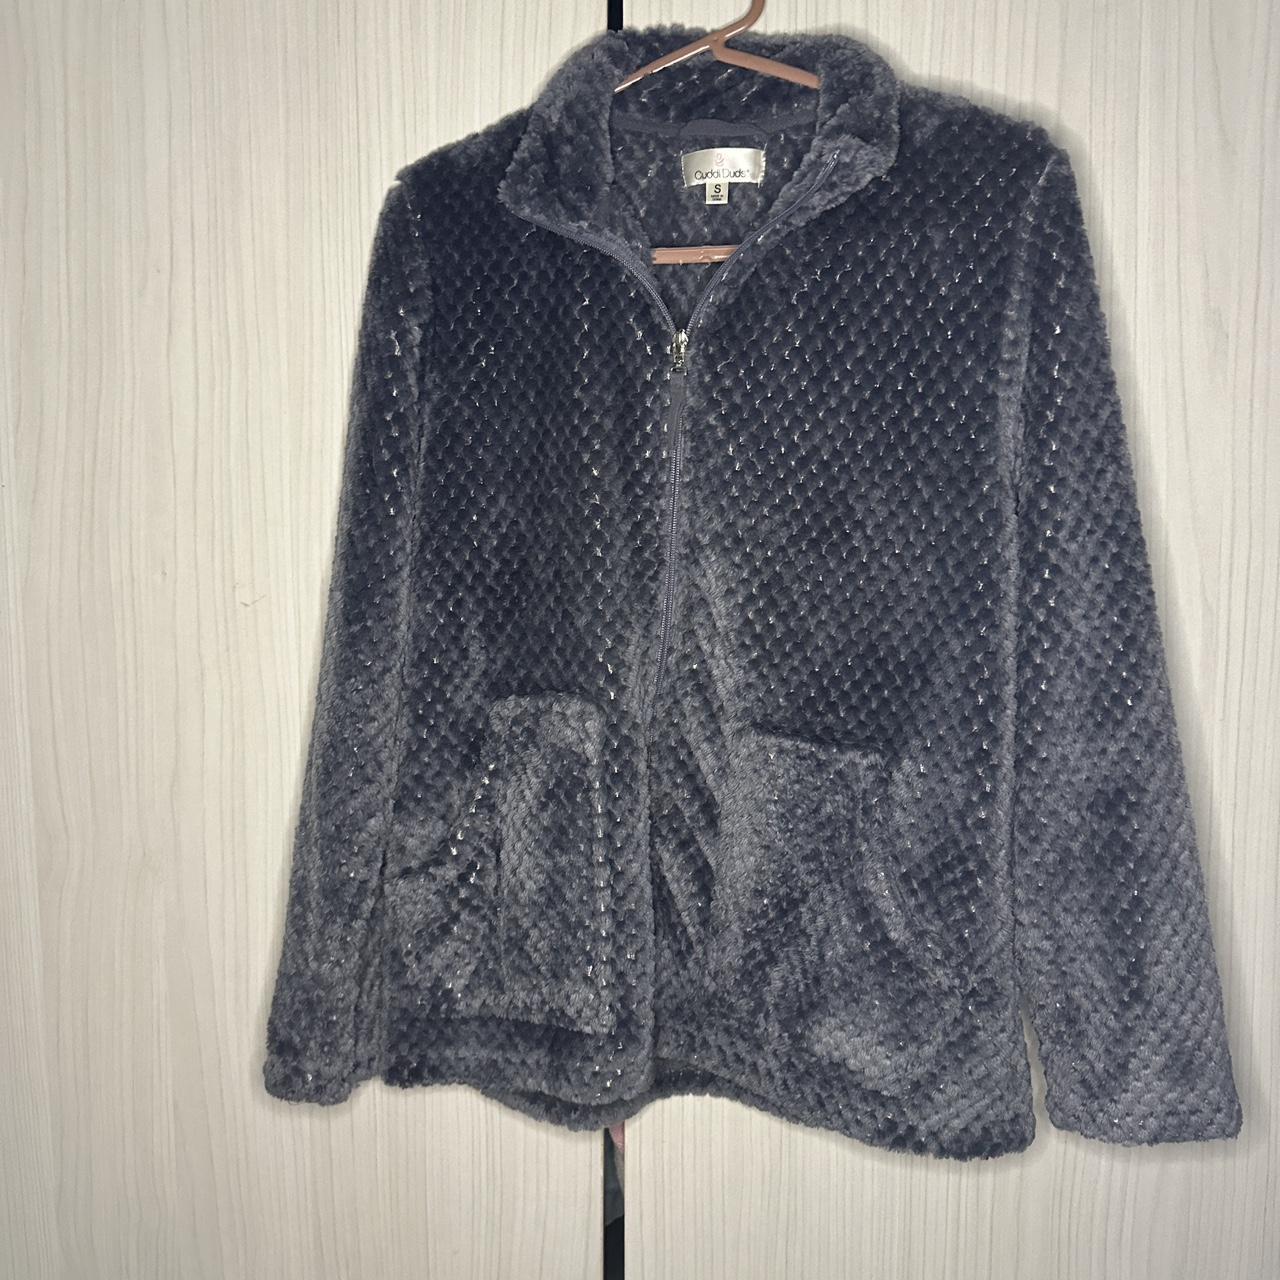 Cuddle duds small jacket great for night or under coat - Depop